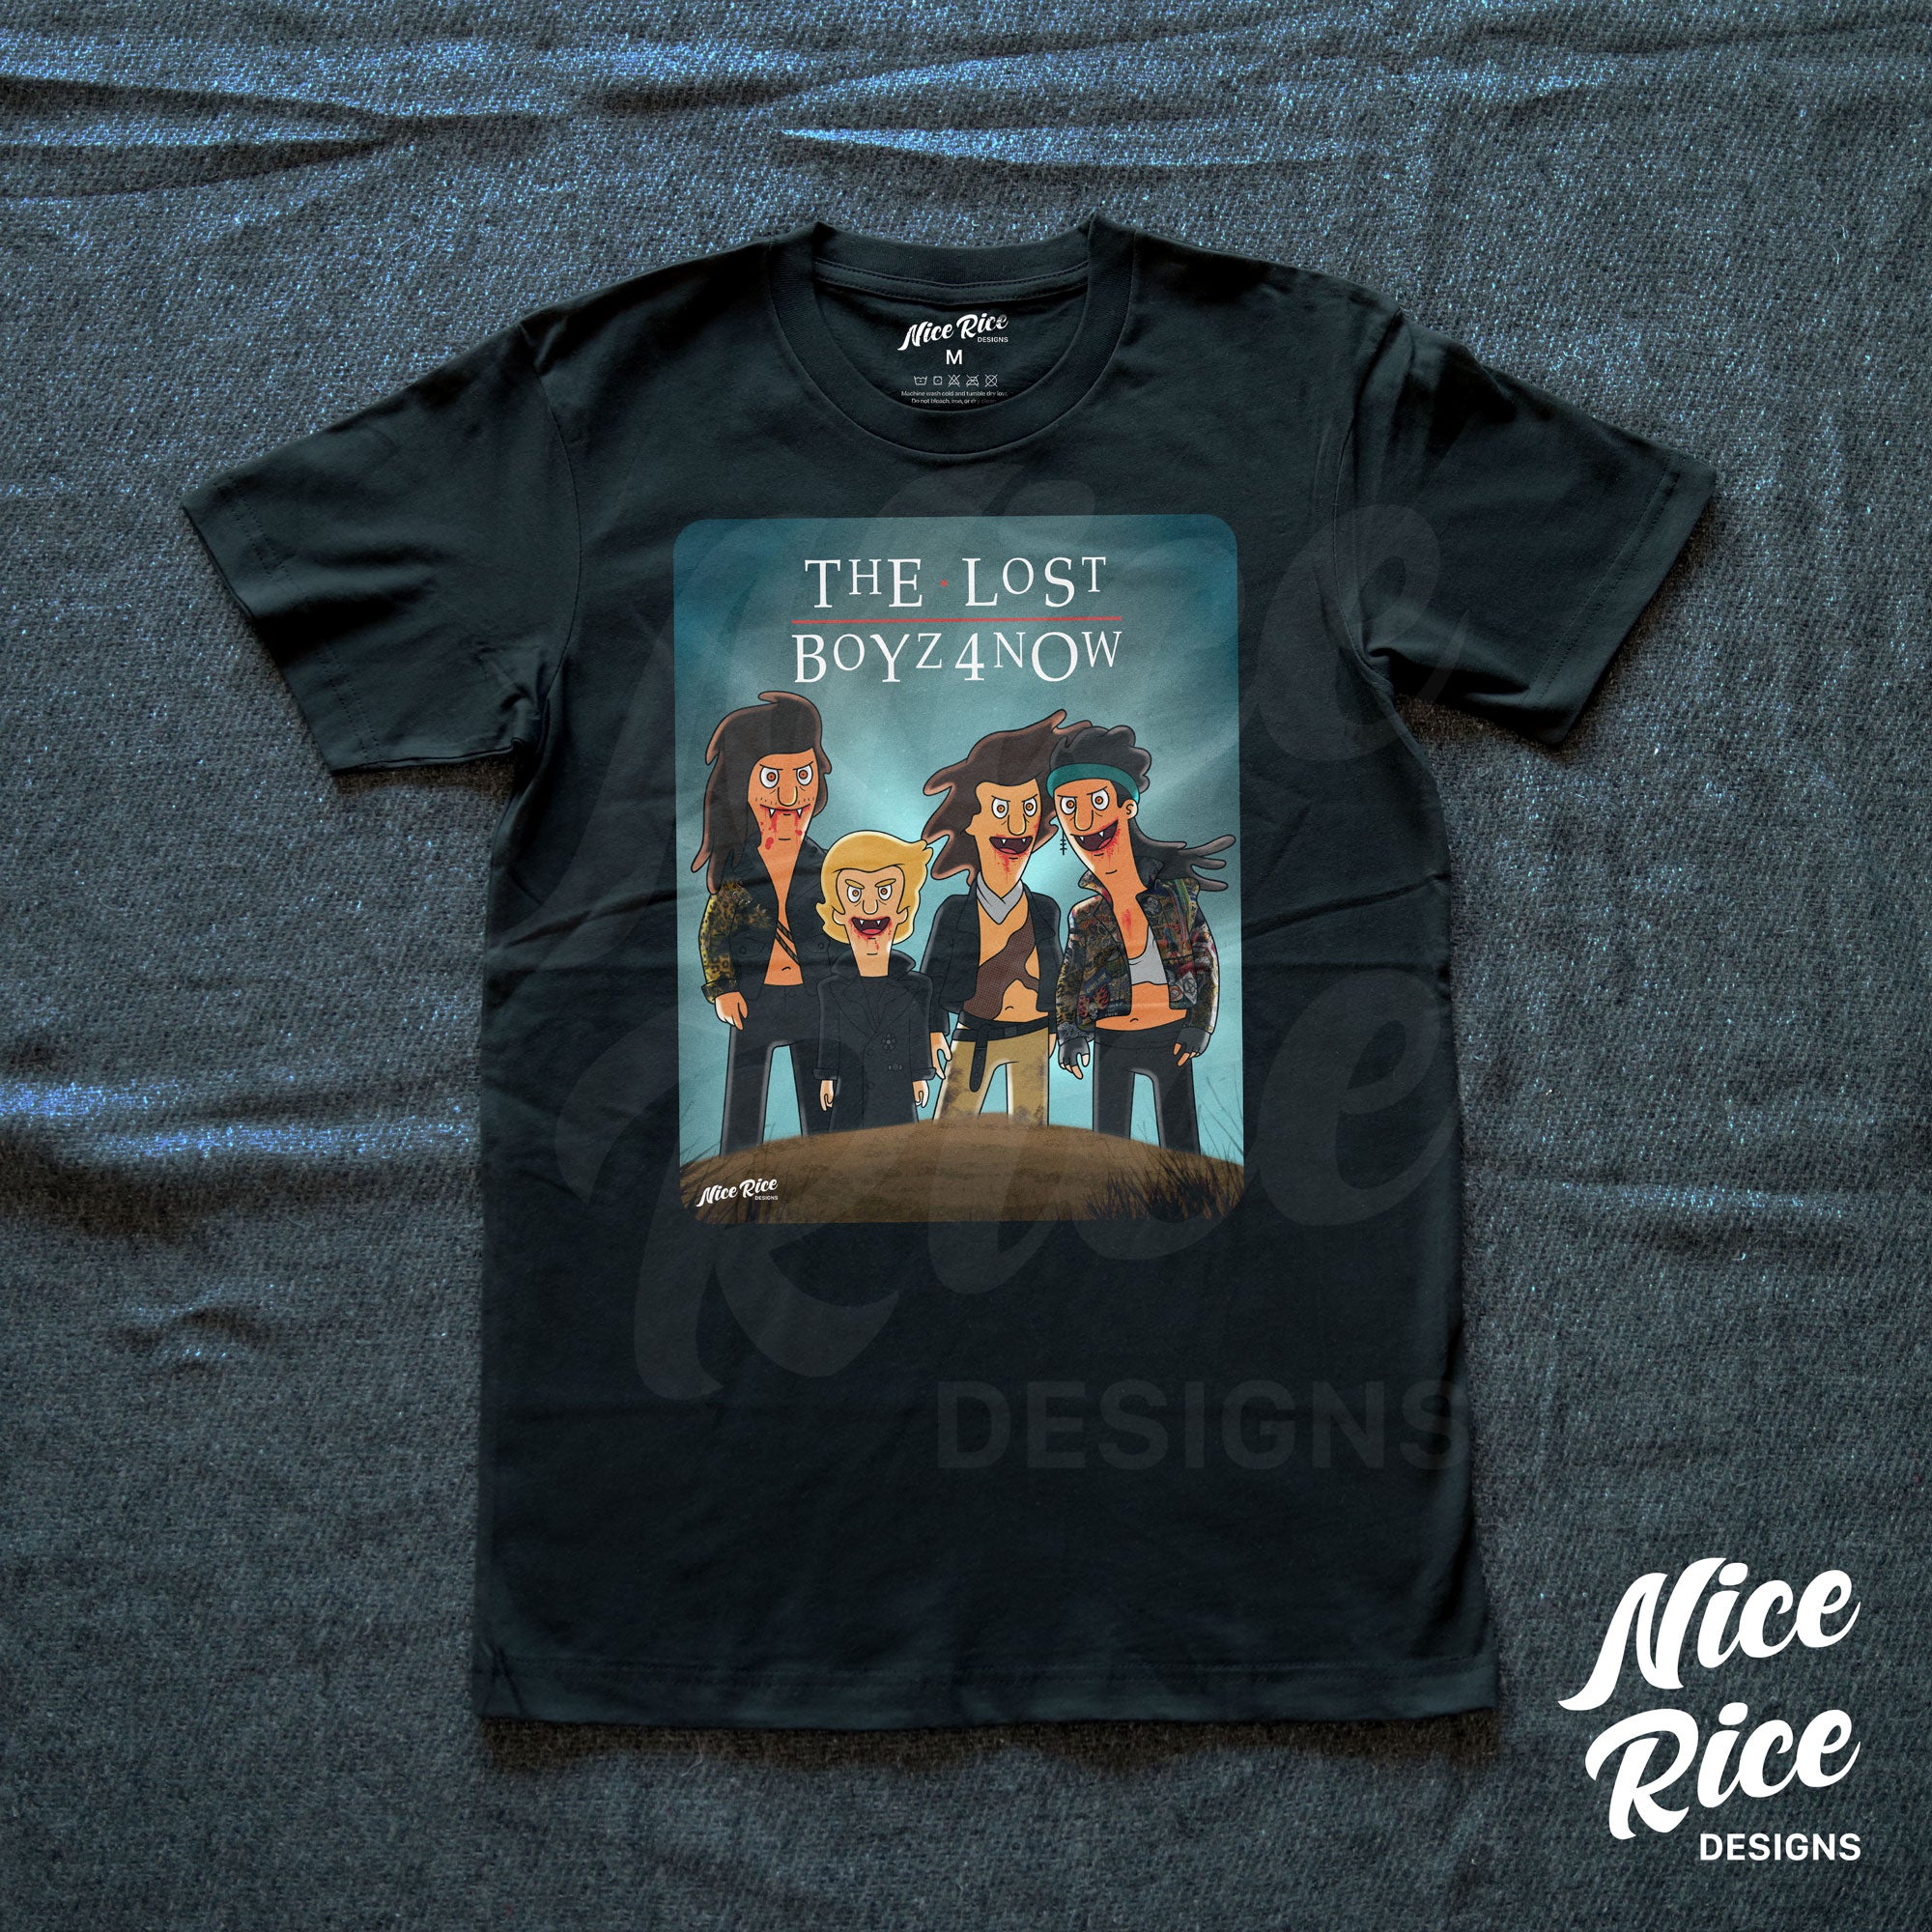 The Lost Boyz 4 Now Shirt by Nice Rice Designs